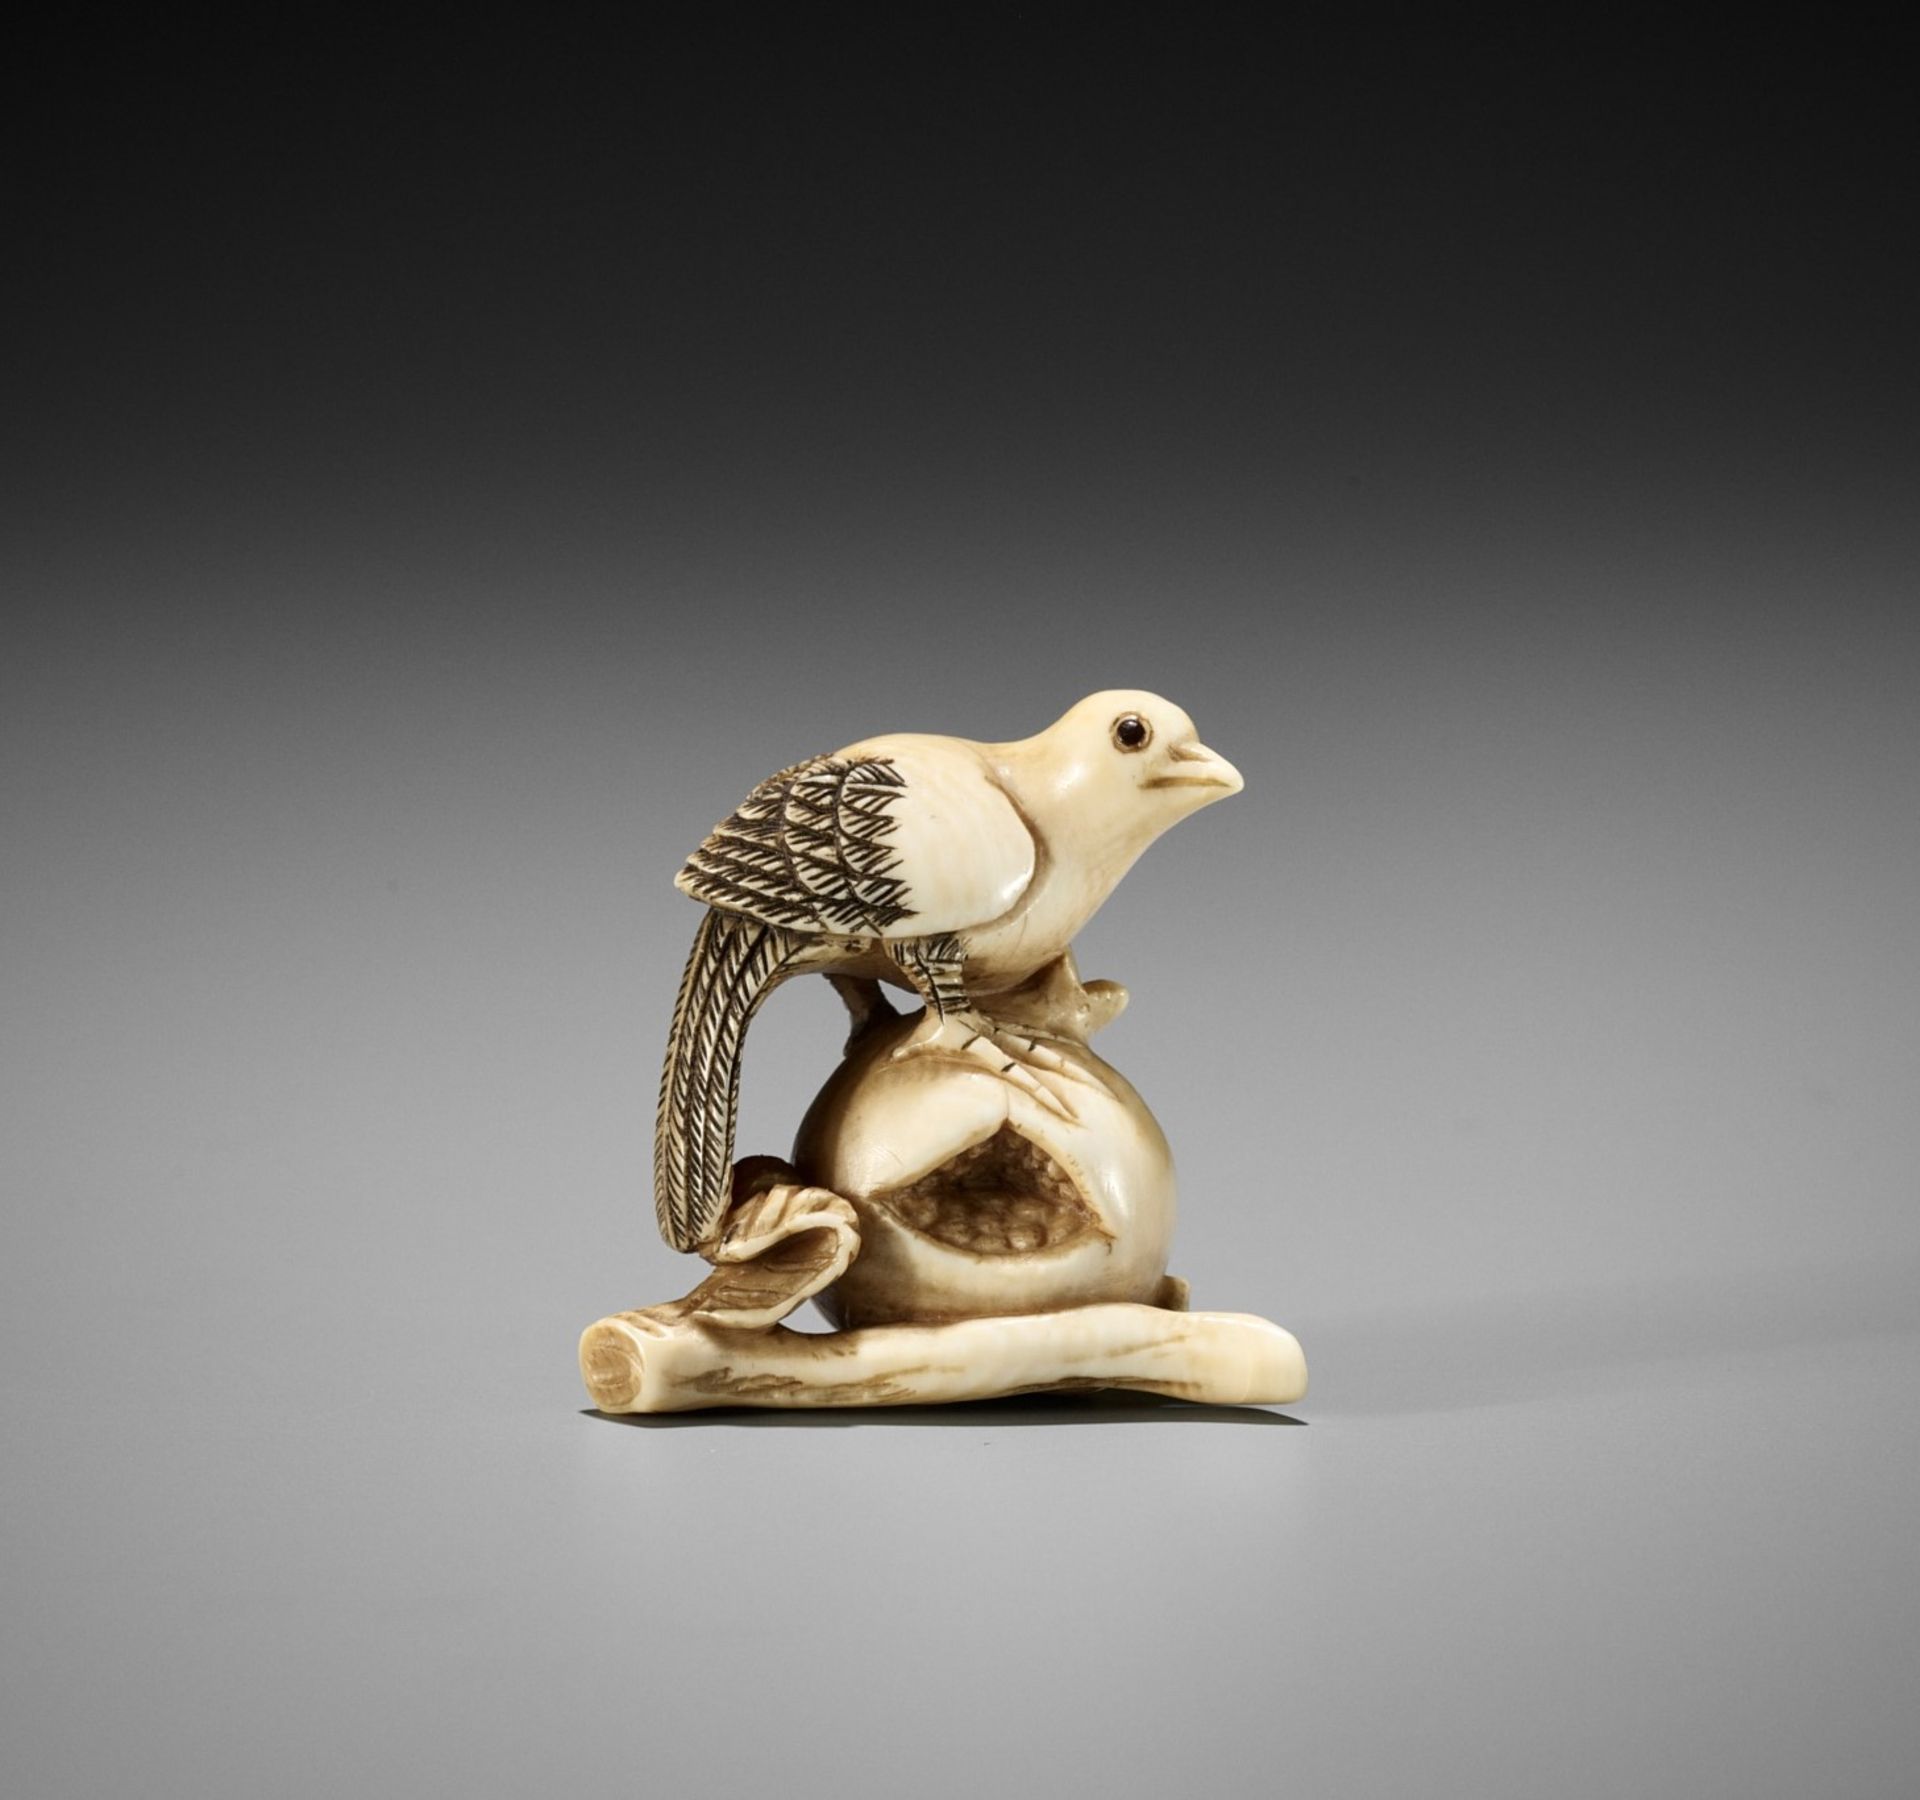 AN IVORY NETSUKE OF A PIGEON PERCHED ON A POMEGRANATE, ATTRIBUTED TO ANRAKU